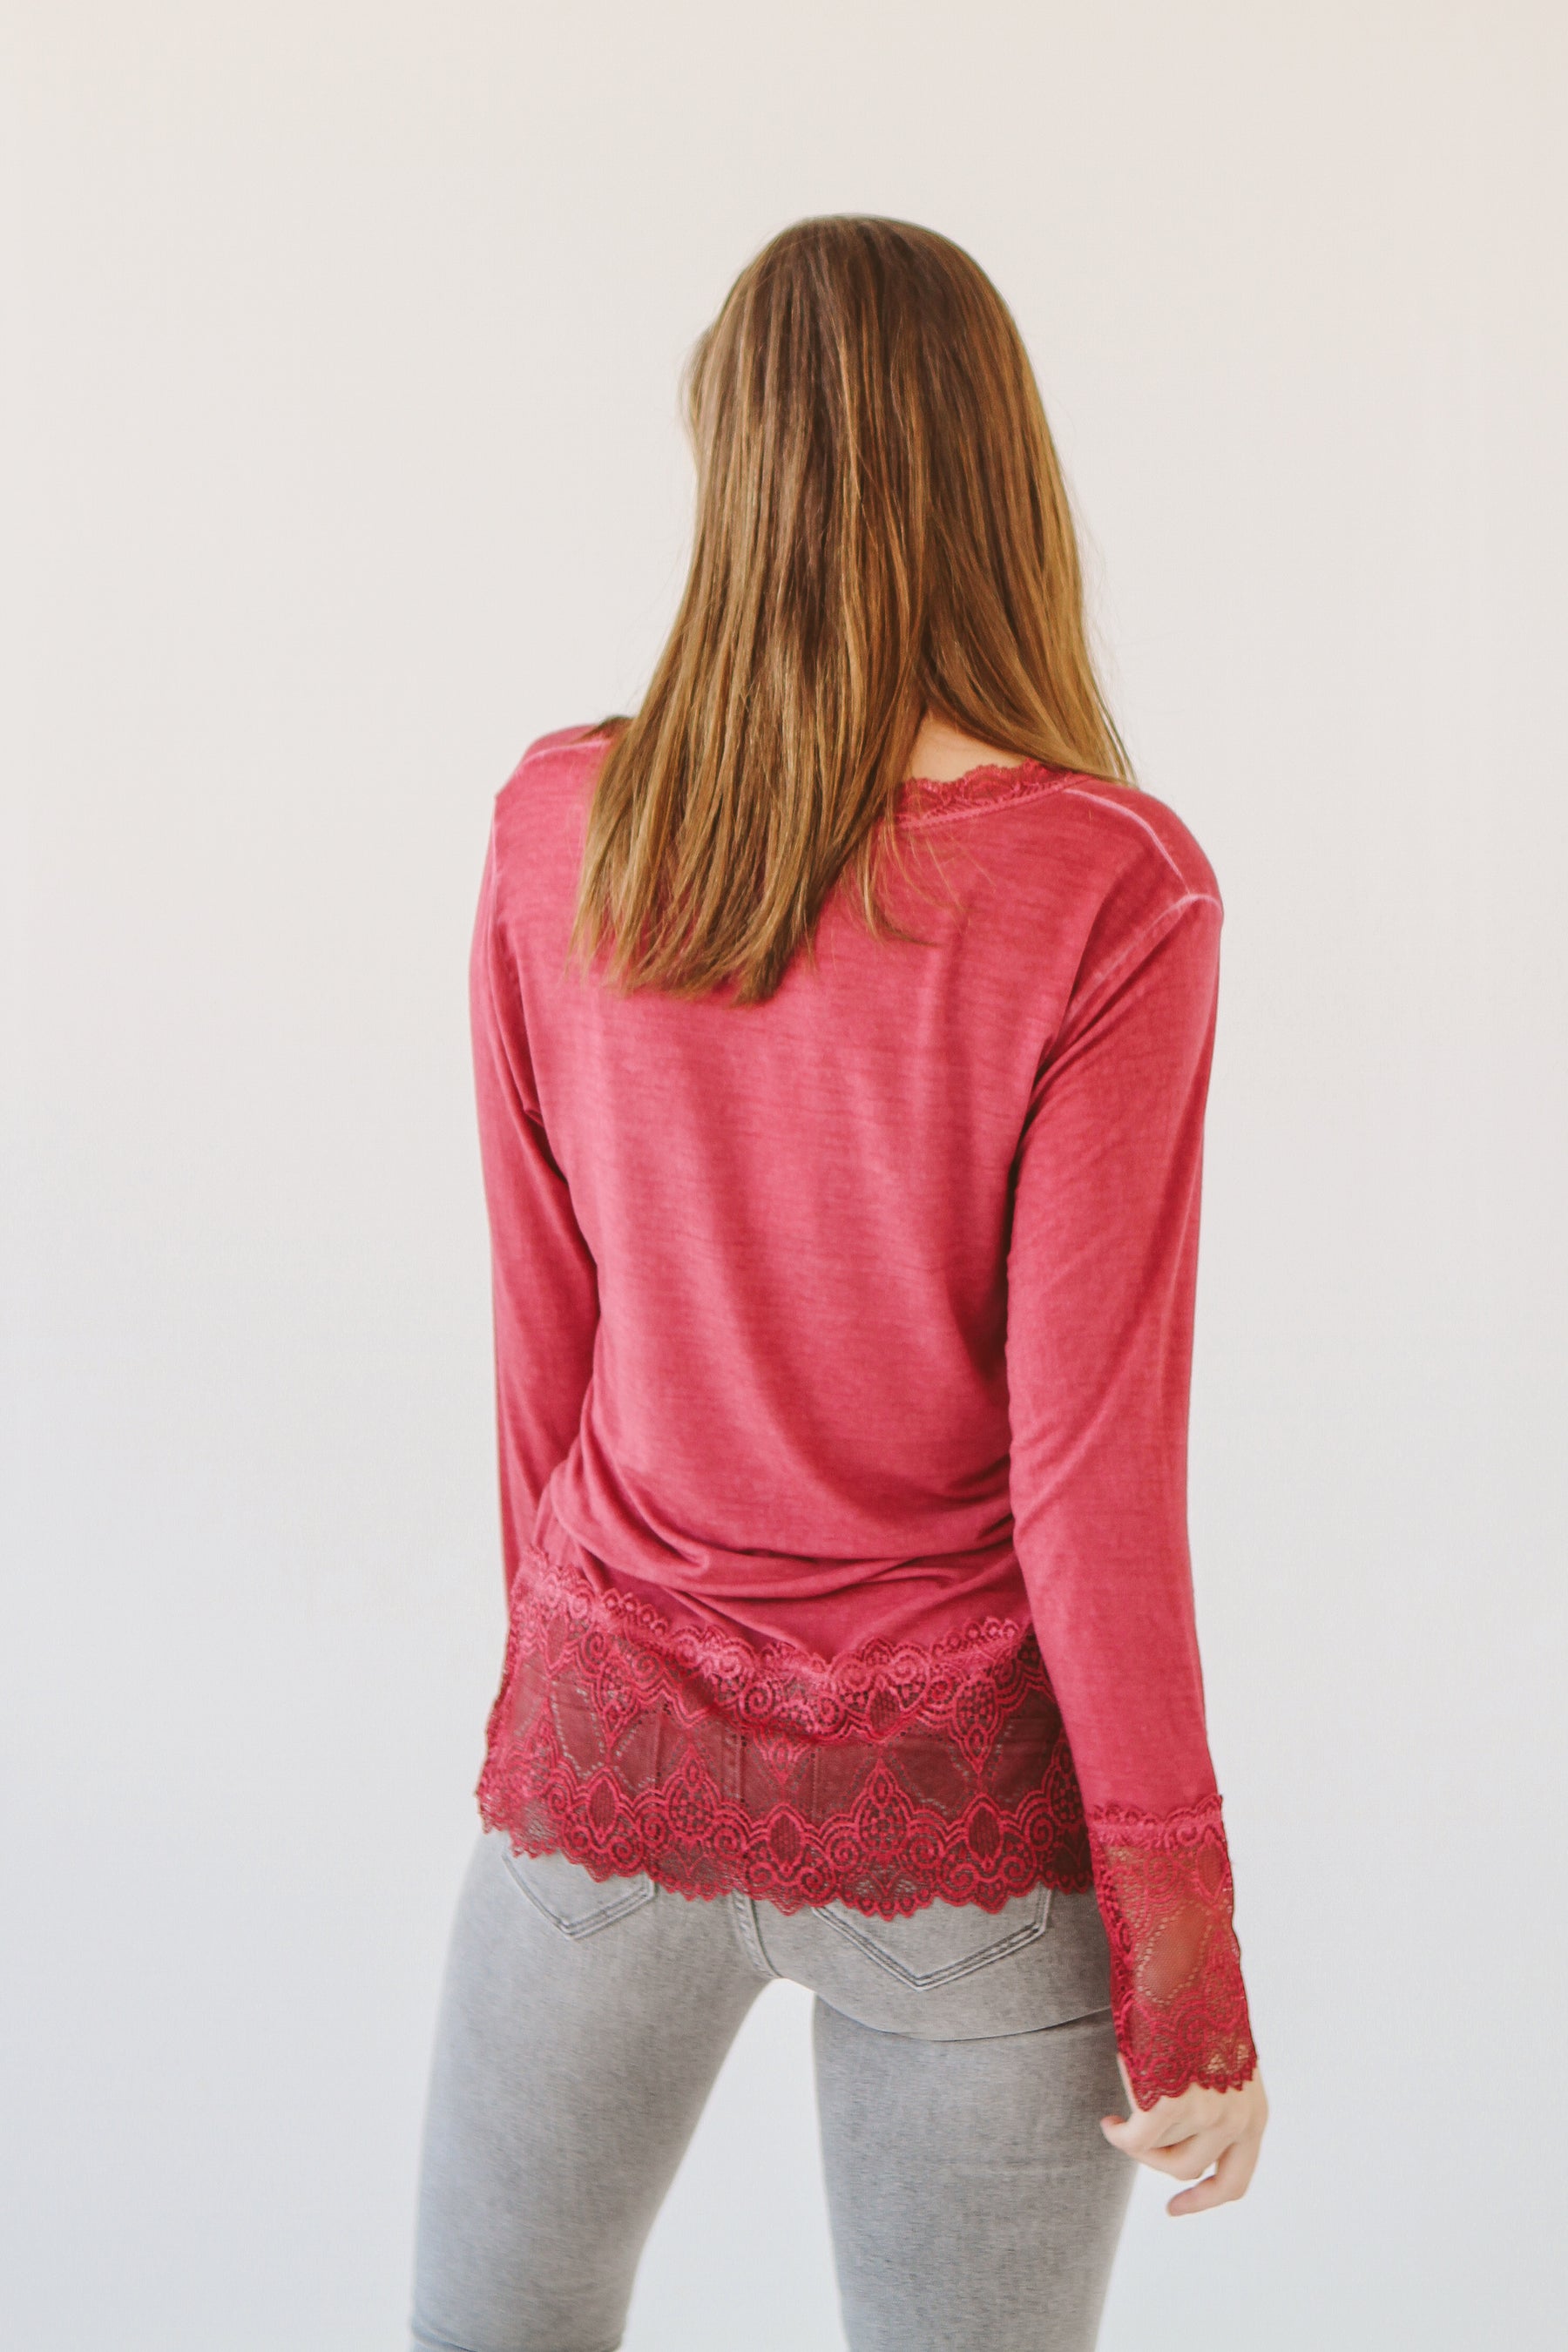 Basic Lace Top